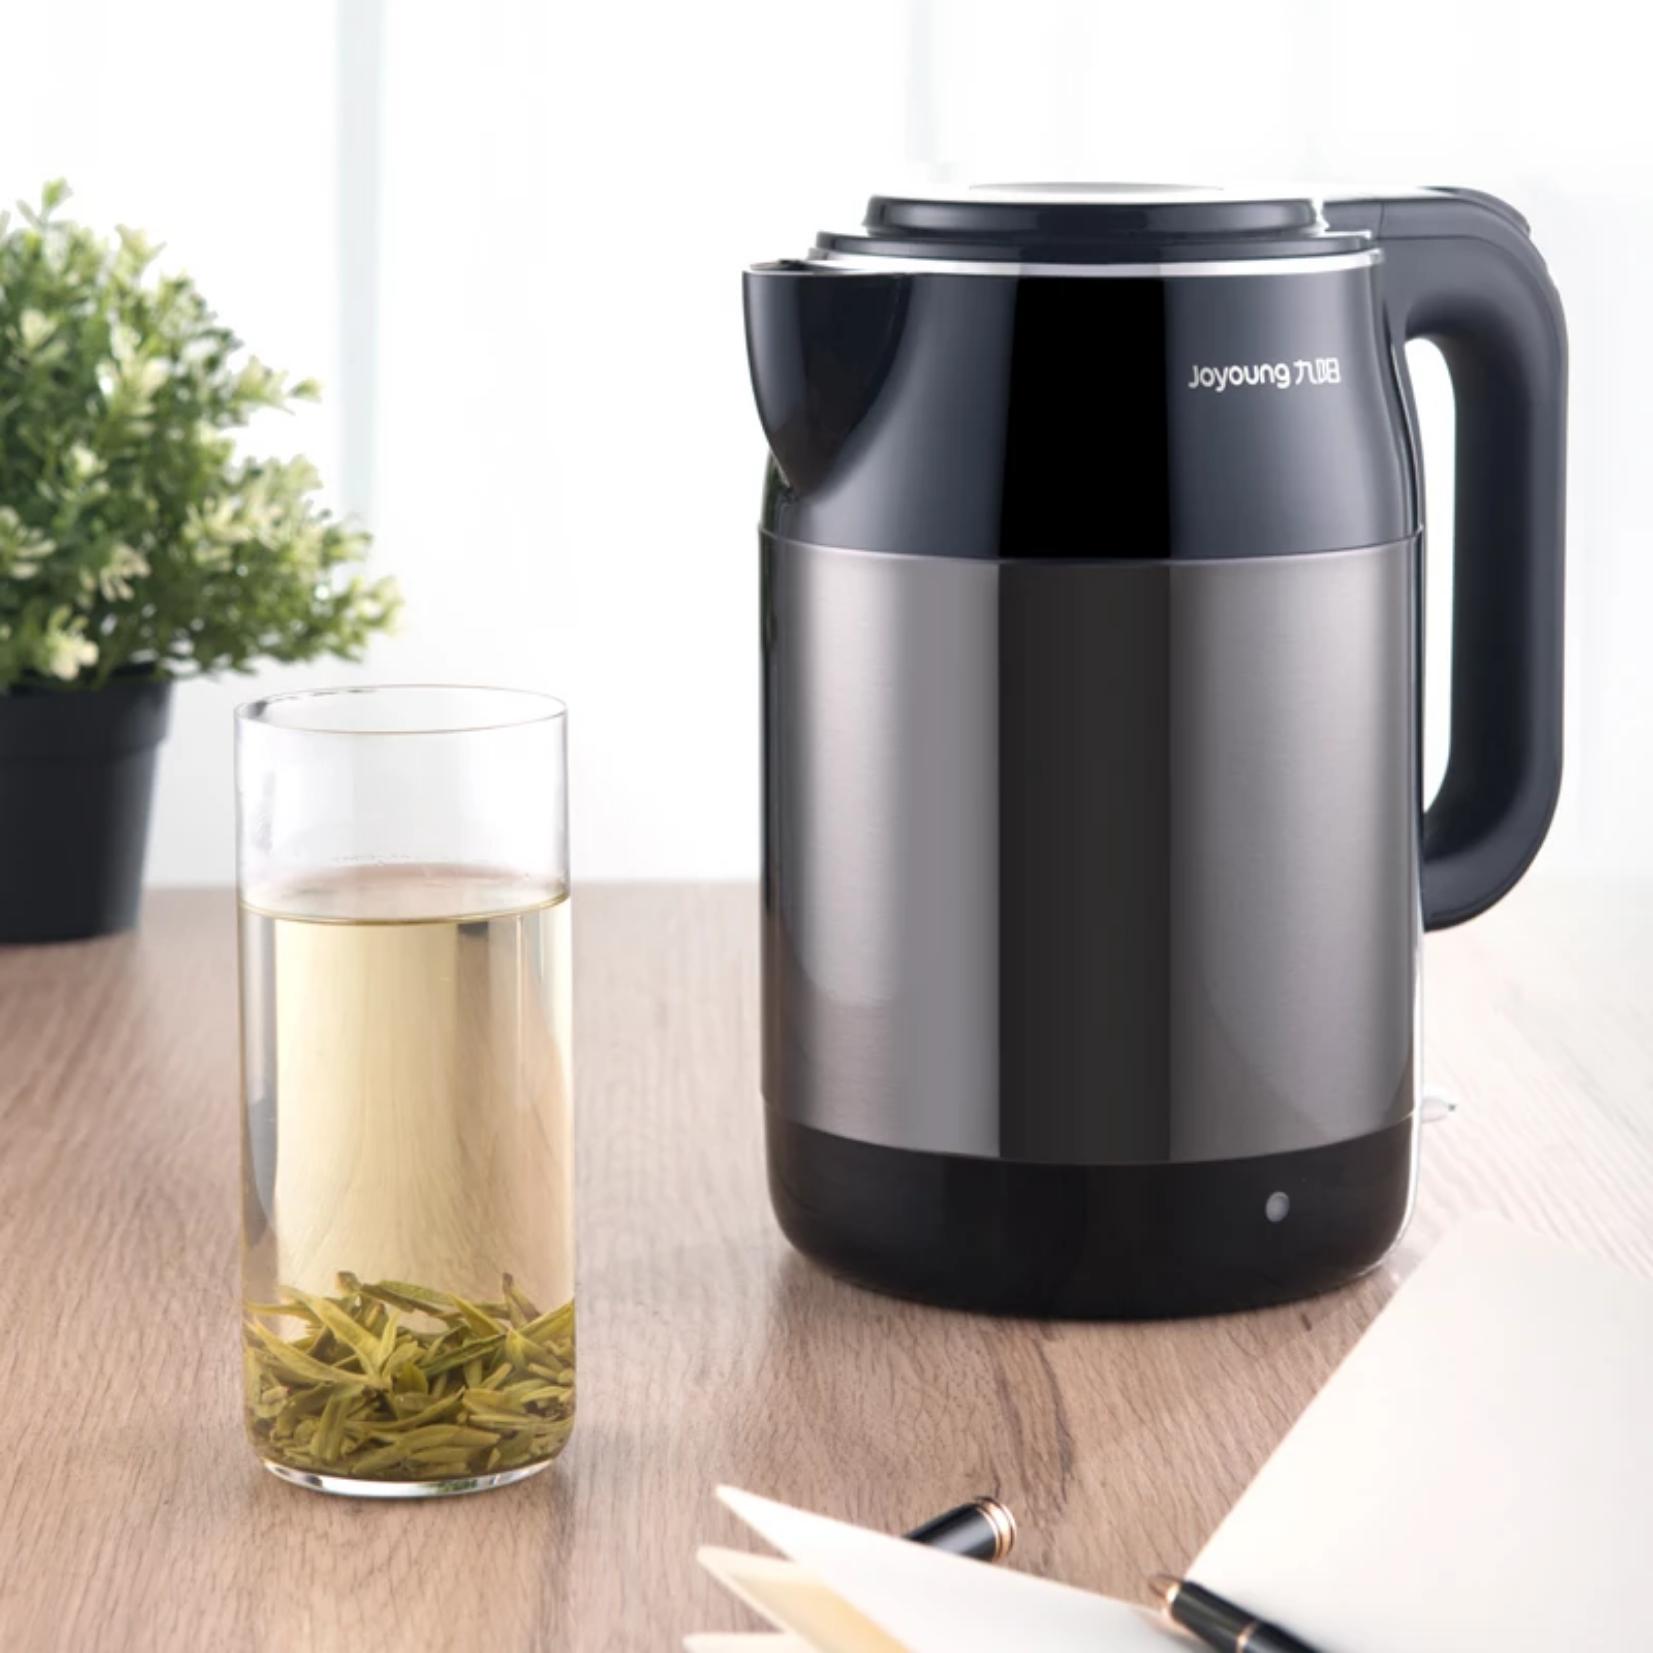 Joyoung Electric Kettle K17-F67 - 1.7L Large Capacity 1800W Fast Boiling Inner Layer is 304 Food Grade Stainless Steel